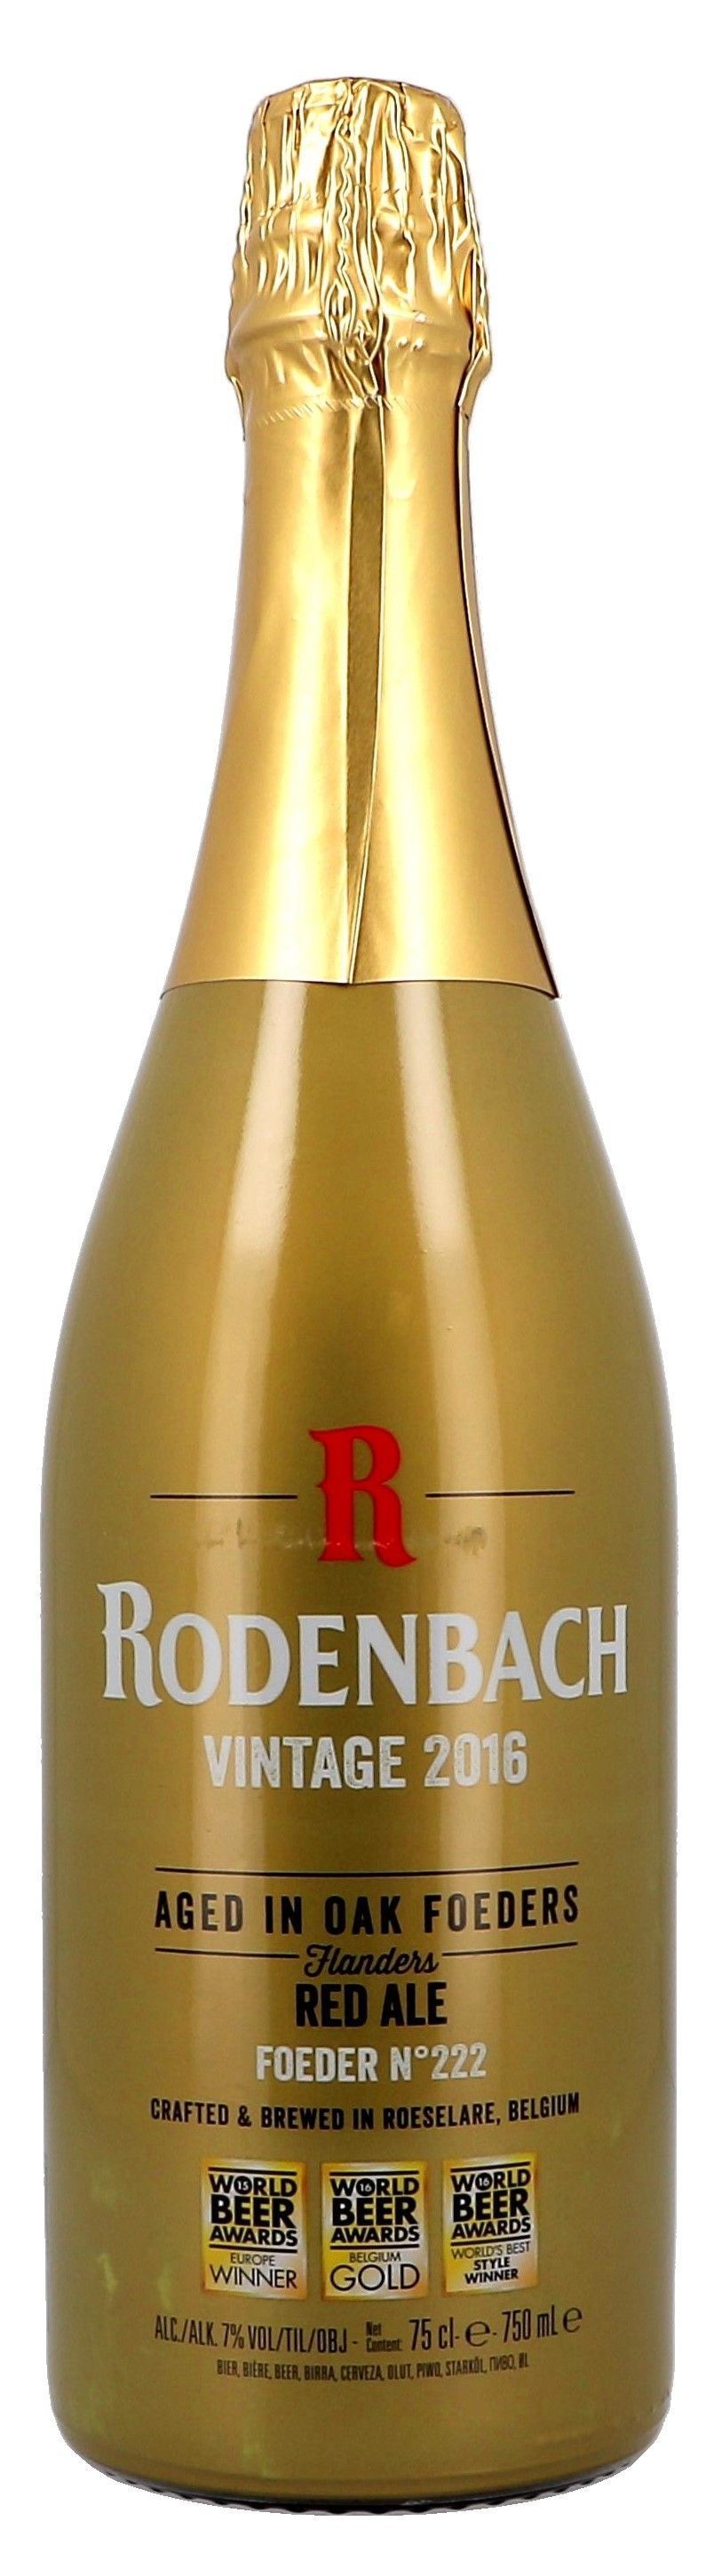 Rodenbach Vintage 2016 Limited Edition 75cl